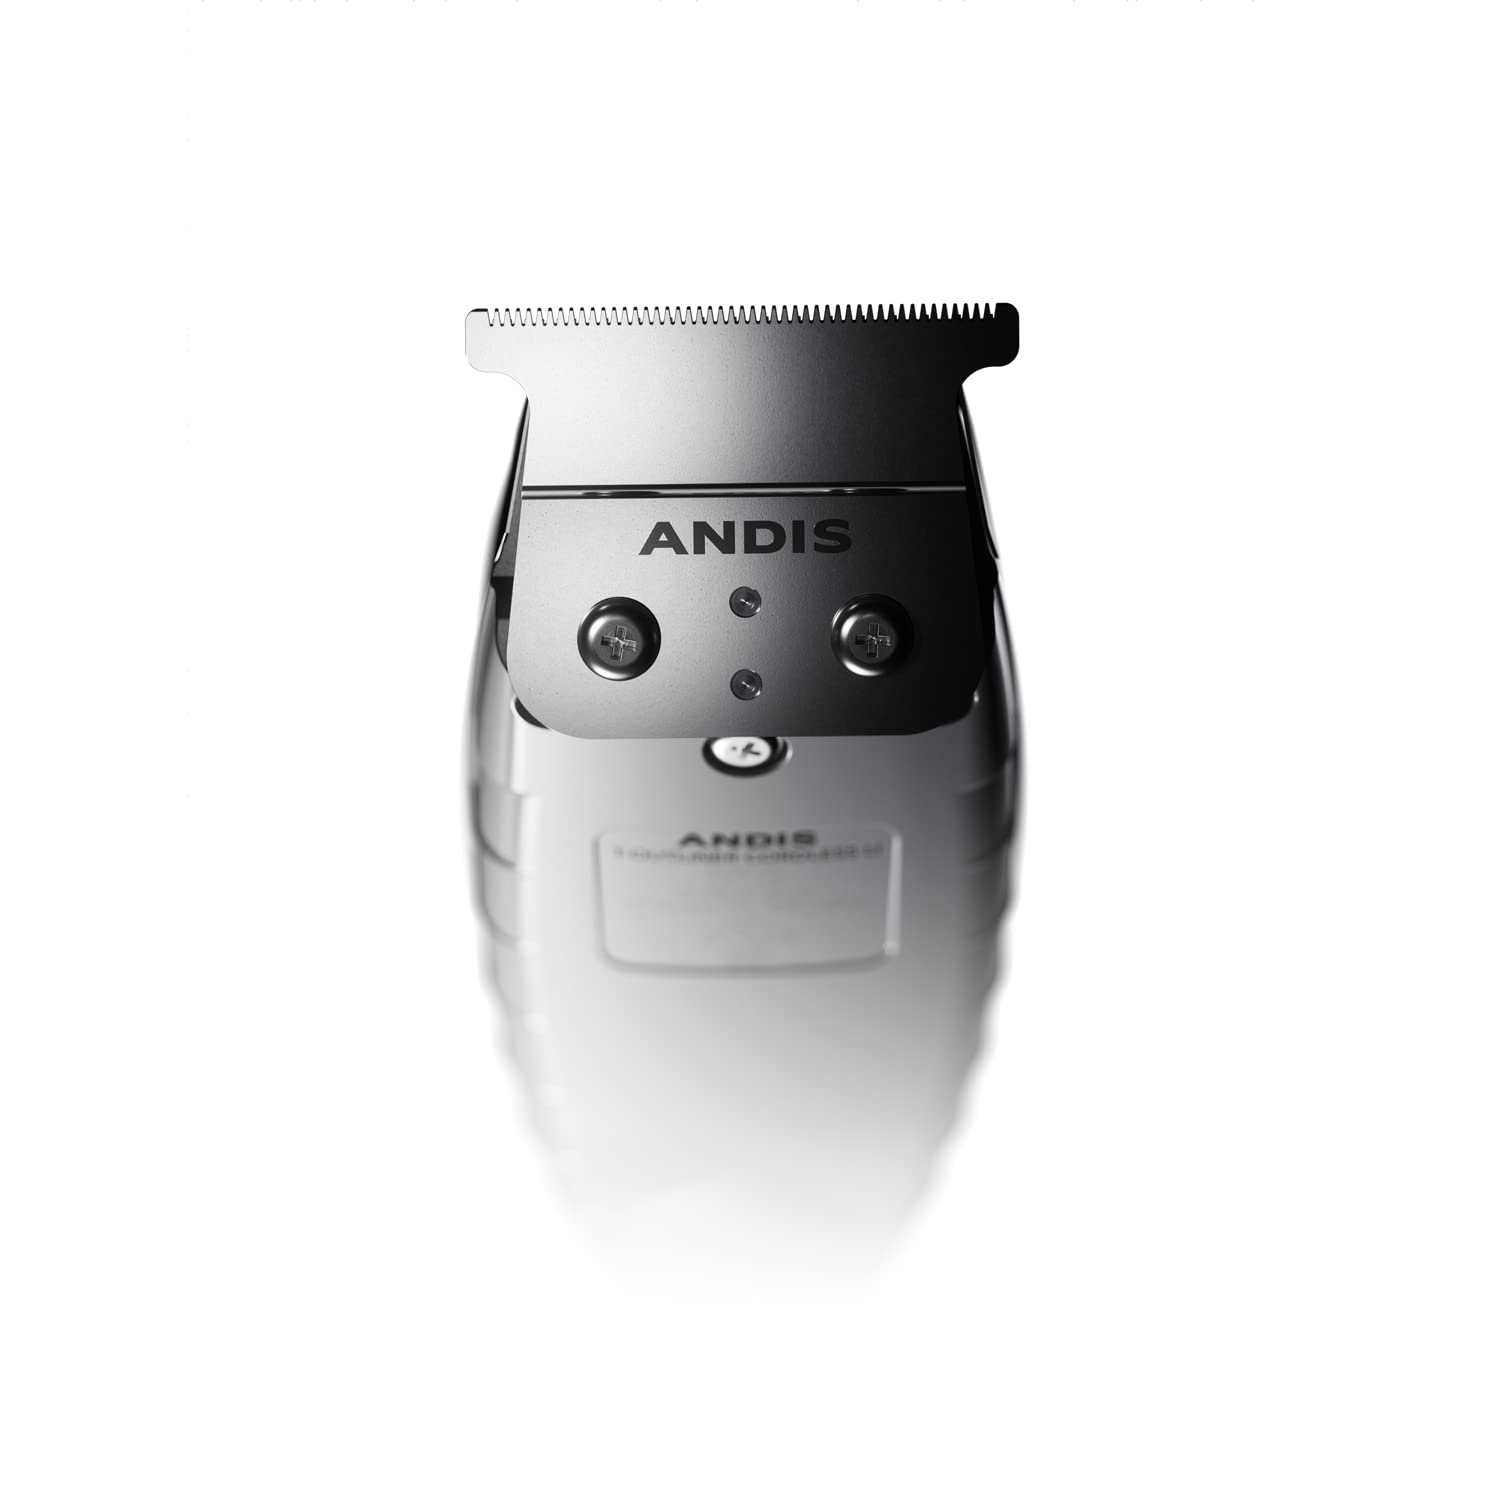 Andis 74055 Professional Corded/Cordless Hair & Beard Trimmer, T-Outliner Blade Trimmer, Zero Gapped, Close Cutting Carbon Steel T-Blade Trimmer - Grey - Pro-Distributing